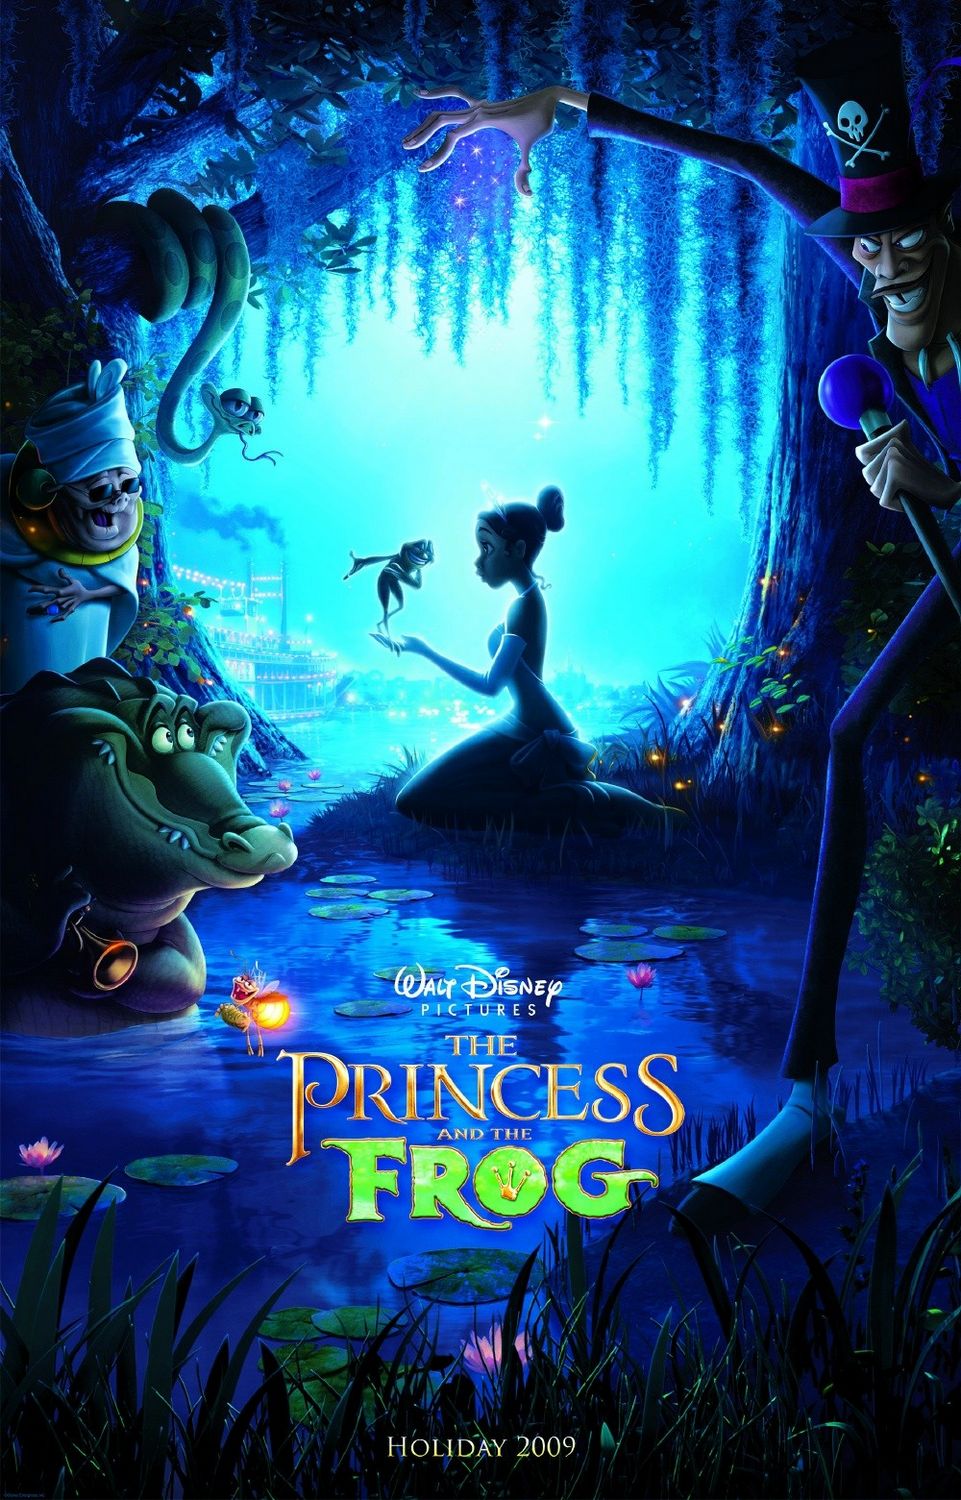 The Princess and The Frog (2009) Film Review Archetypes